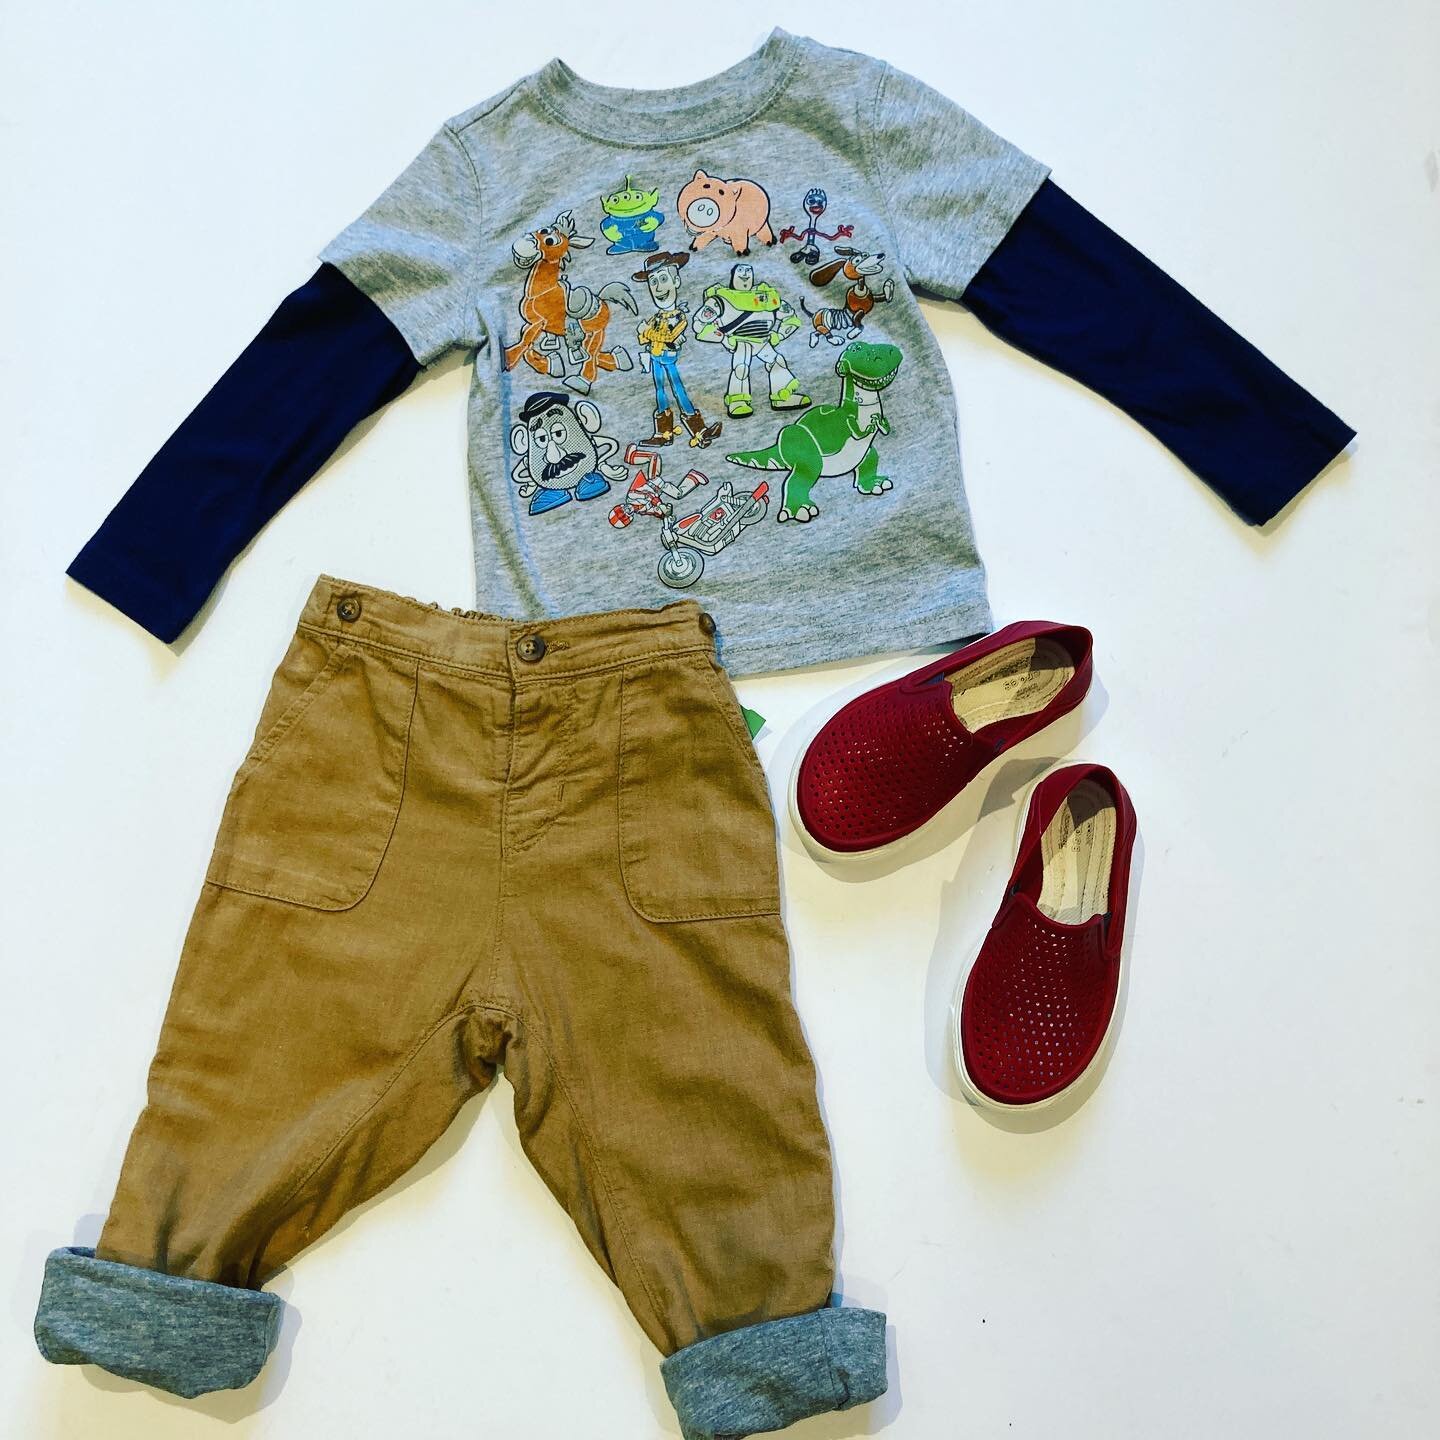 Fall will be here before you know it&hellip;. How about this Disney toy story long sleeve sleeve Sz 2T $7.99
-H&amp;M camel cotton jersey lined Sz 1-1.5 years $7.99
- Amazing Red comfort crocs Sz 8 $14.99
#toystory #disneyforkids #toystoryclothing #c